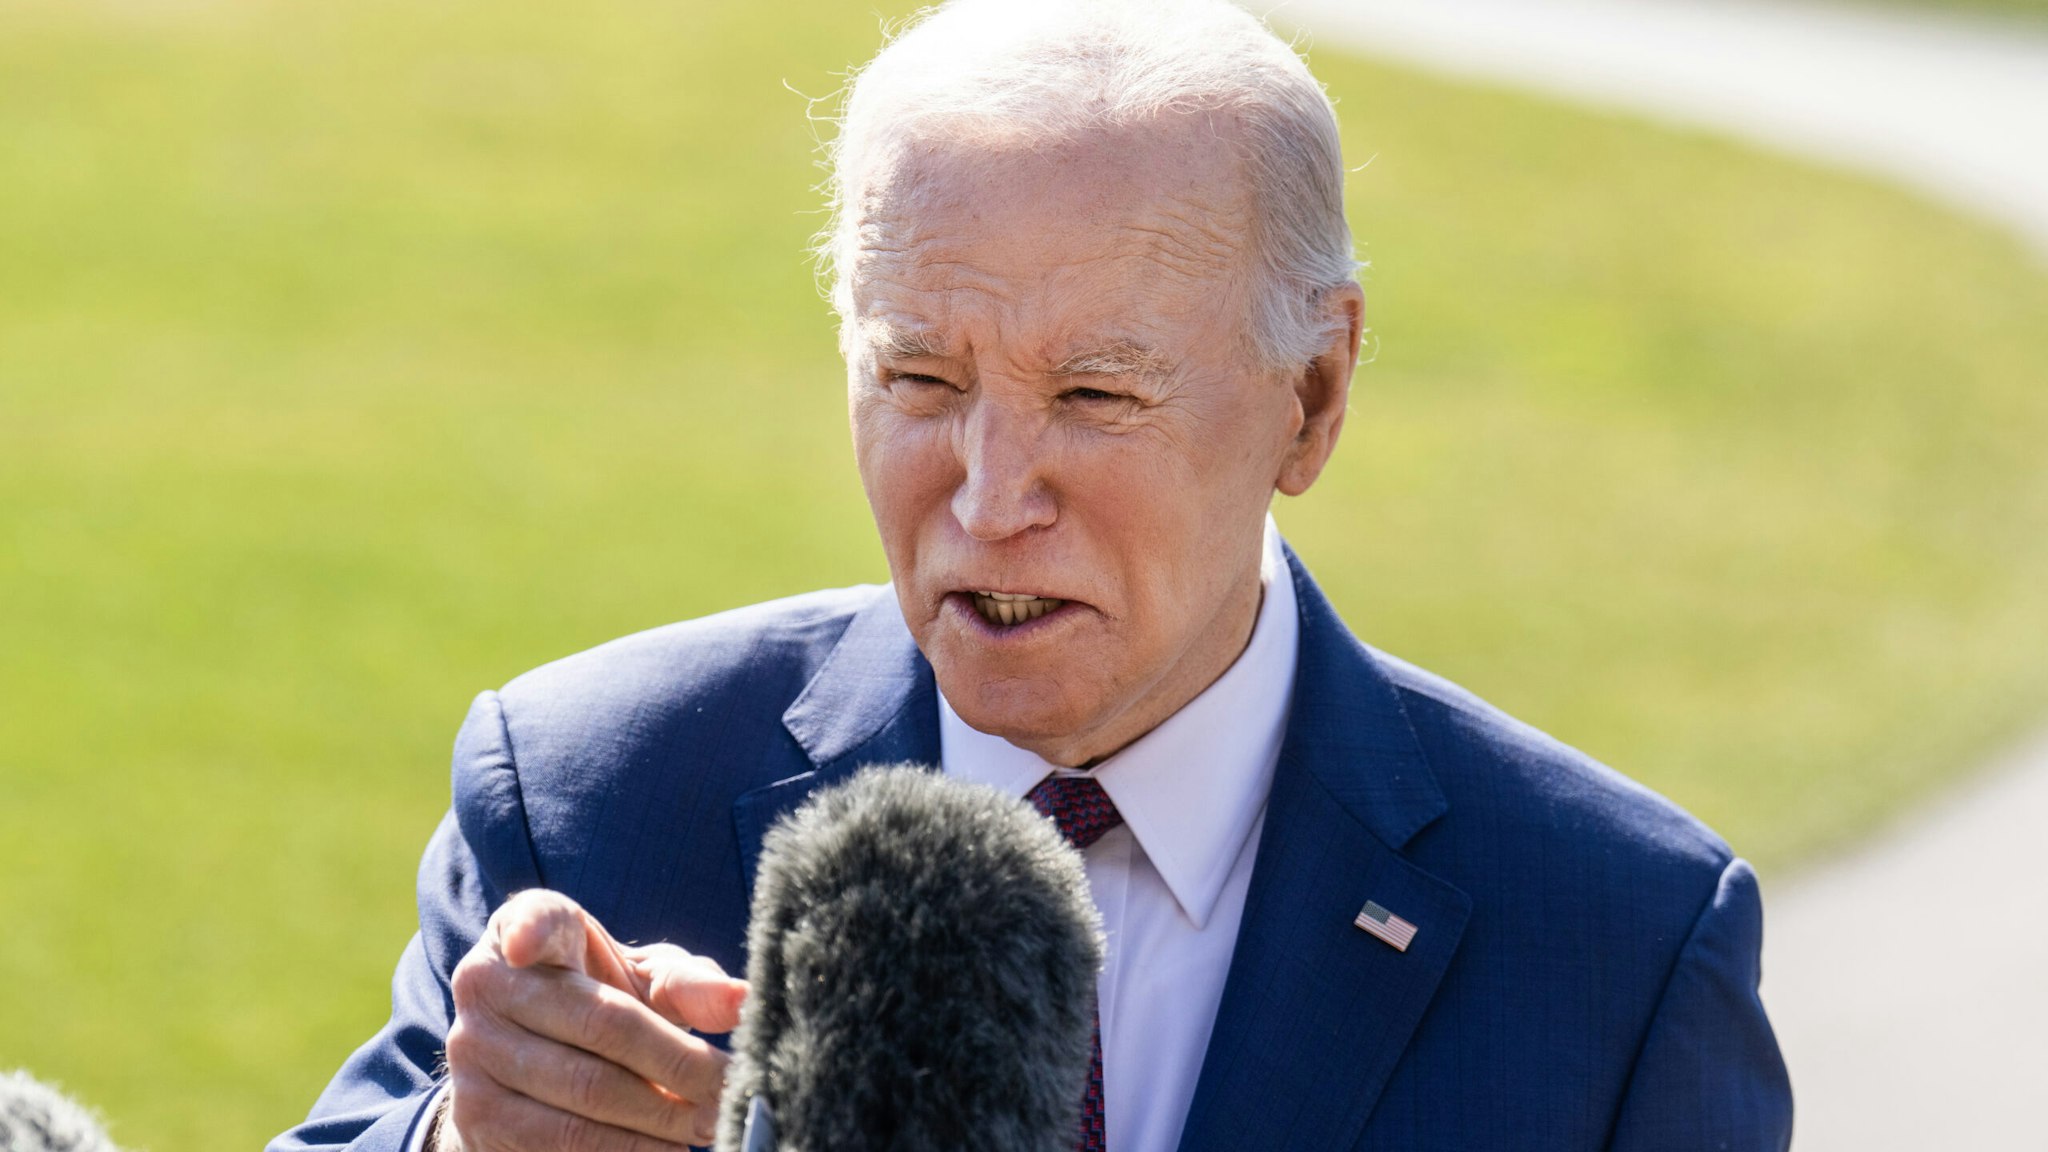 UNITED STATES - FEBRUARY 20: President Joe Biden addresses reporters on the South Lawn of the White House before boarding Marine One for a trip to Los Angeles for a campaign reception on Tuesday, February 20, 2024.